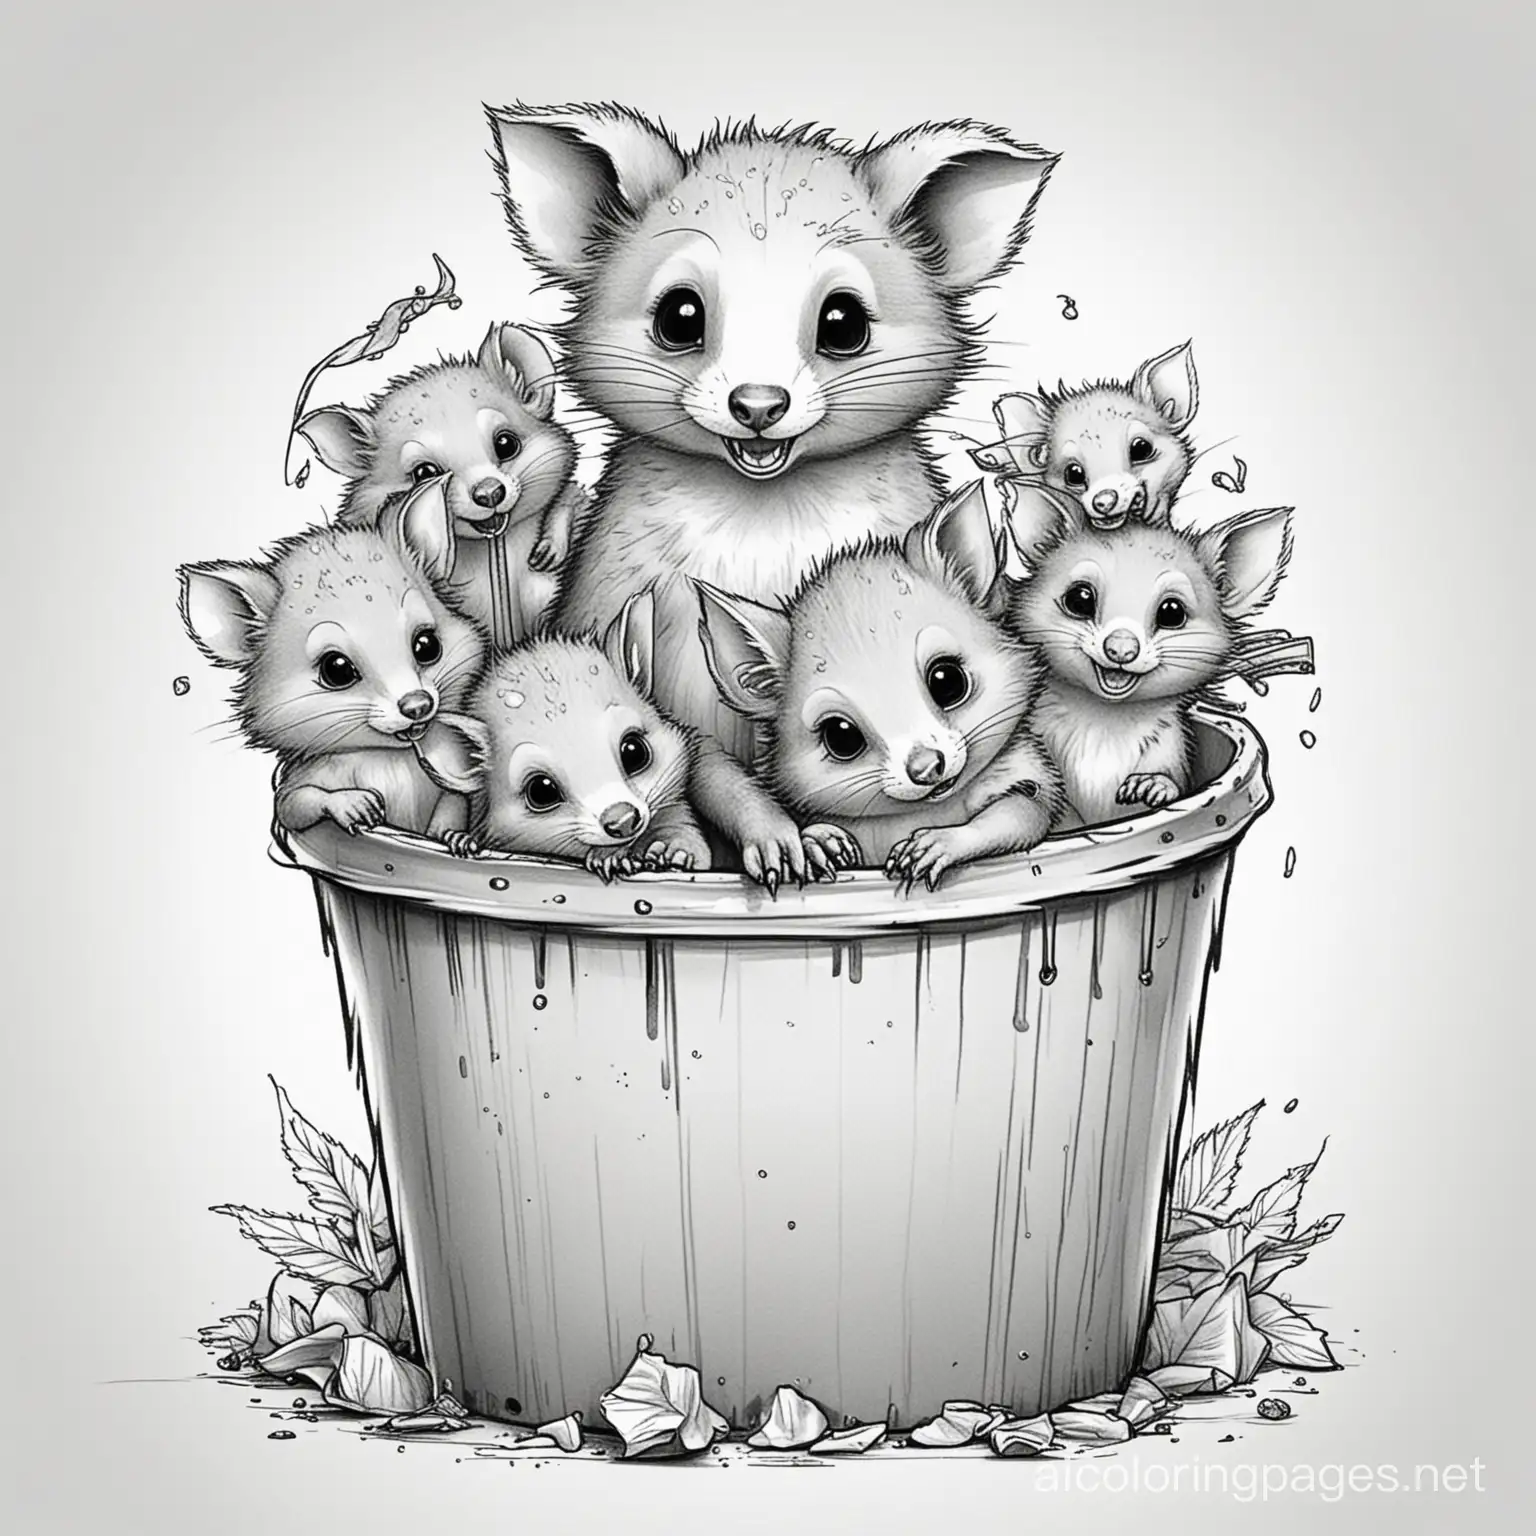 A  happy possum family digging through a trash can. The mother possum has her young on her back., Coloring Page, black and white, line art, white background, Simplicity, Ample White Space. The background of the coloring page is plain white to make it easy for young children to color within the lines. The outlines of all the subjects are easy to distinguish, making it simple for kids to color without too much difficulty